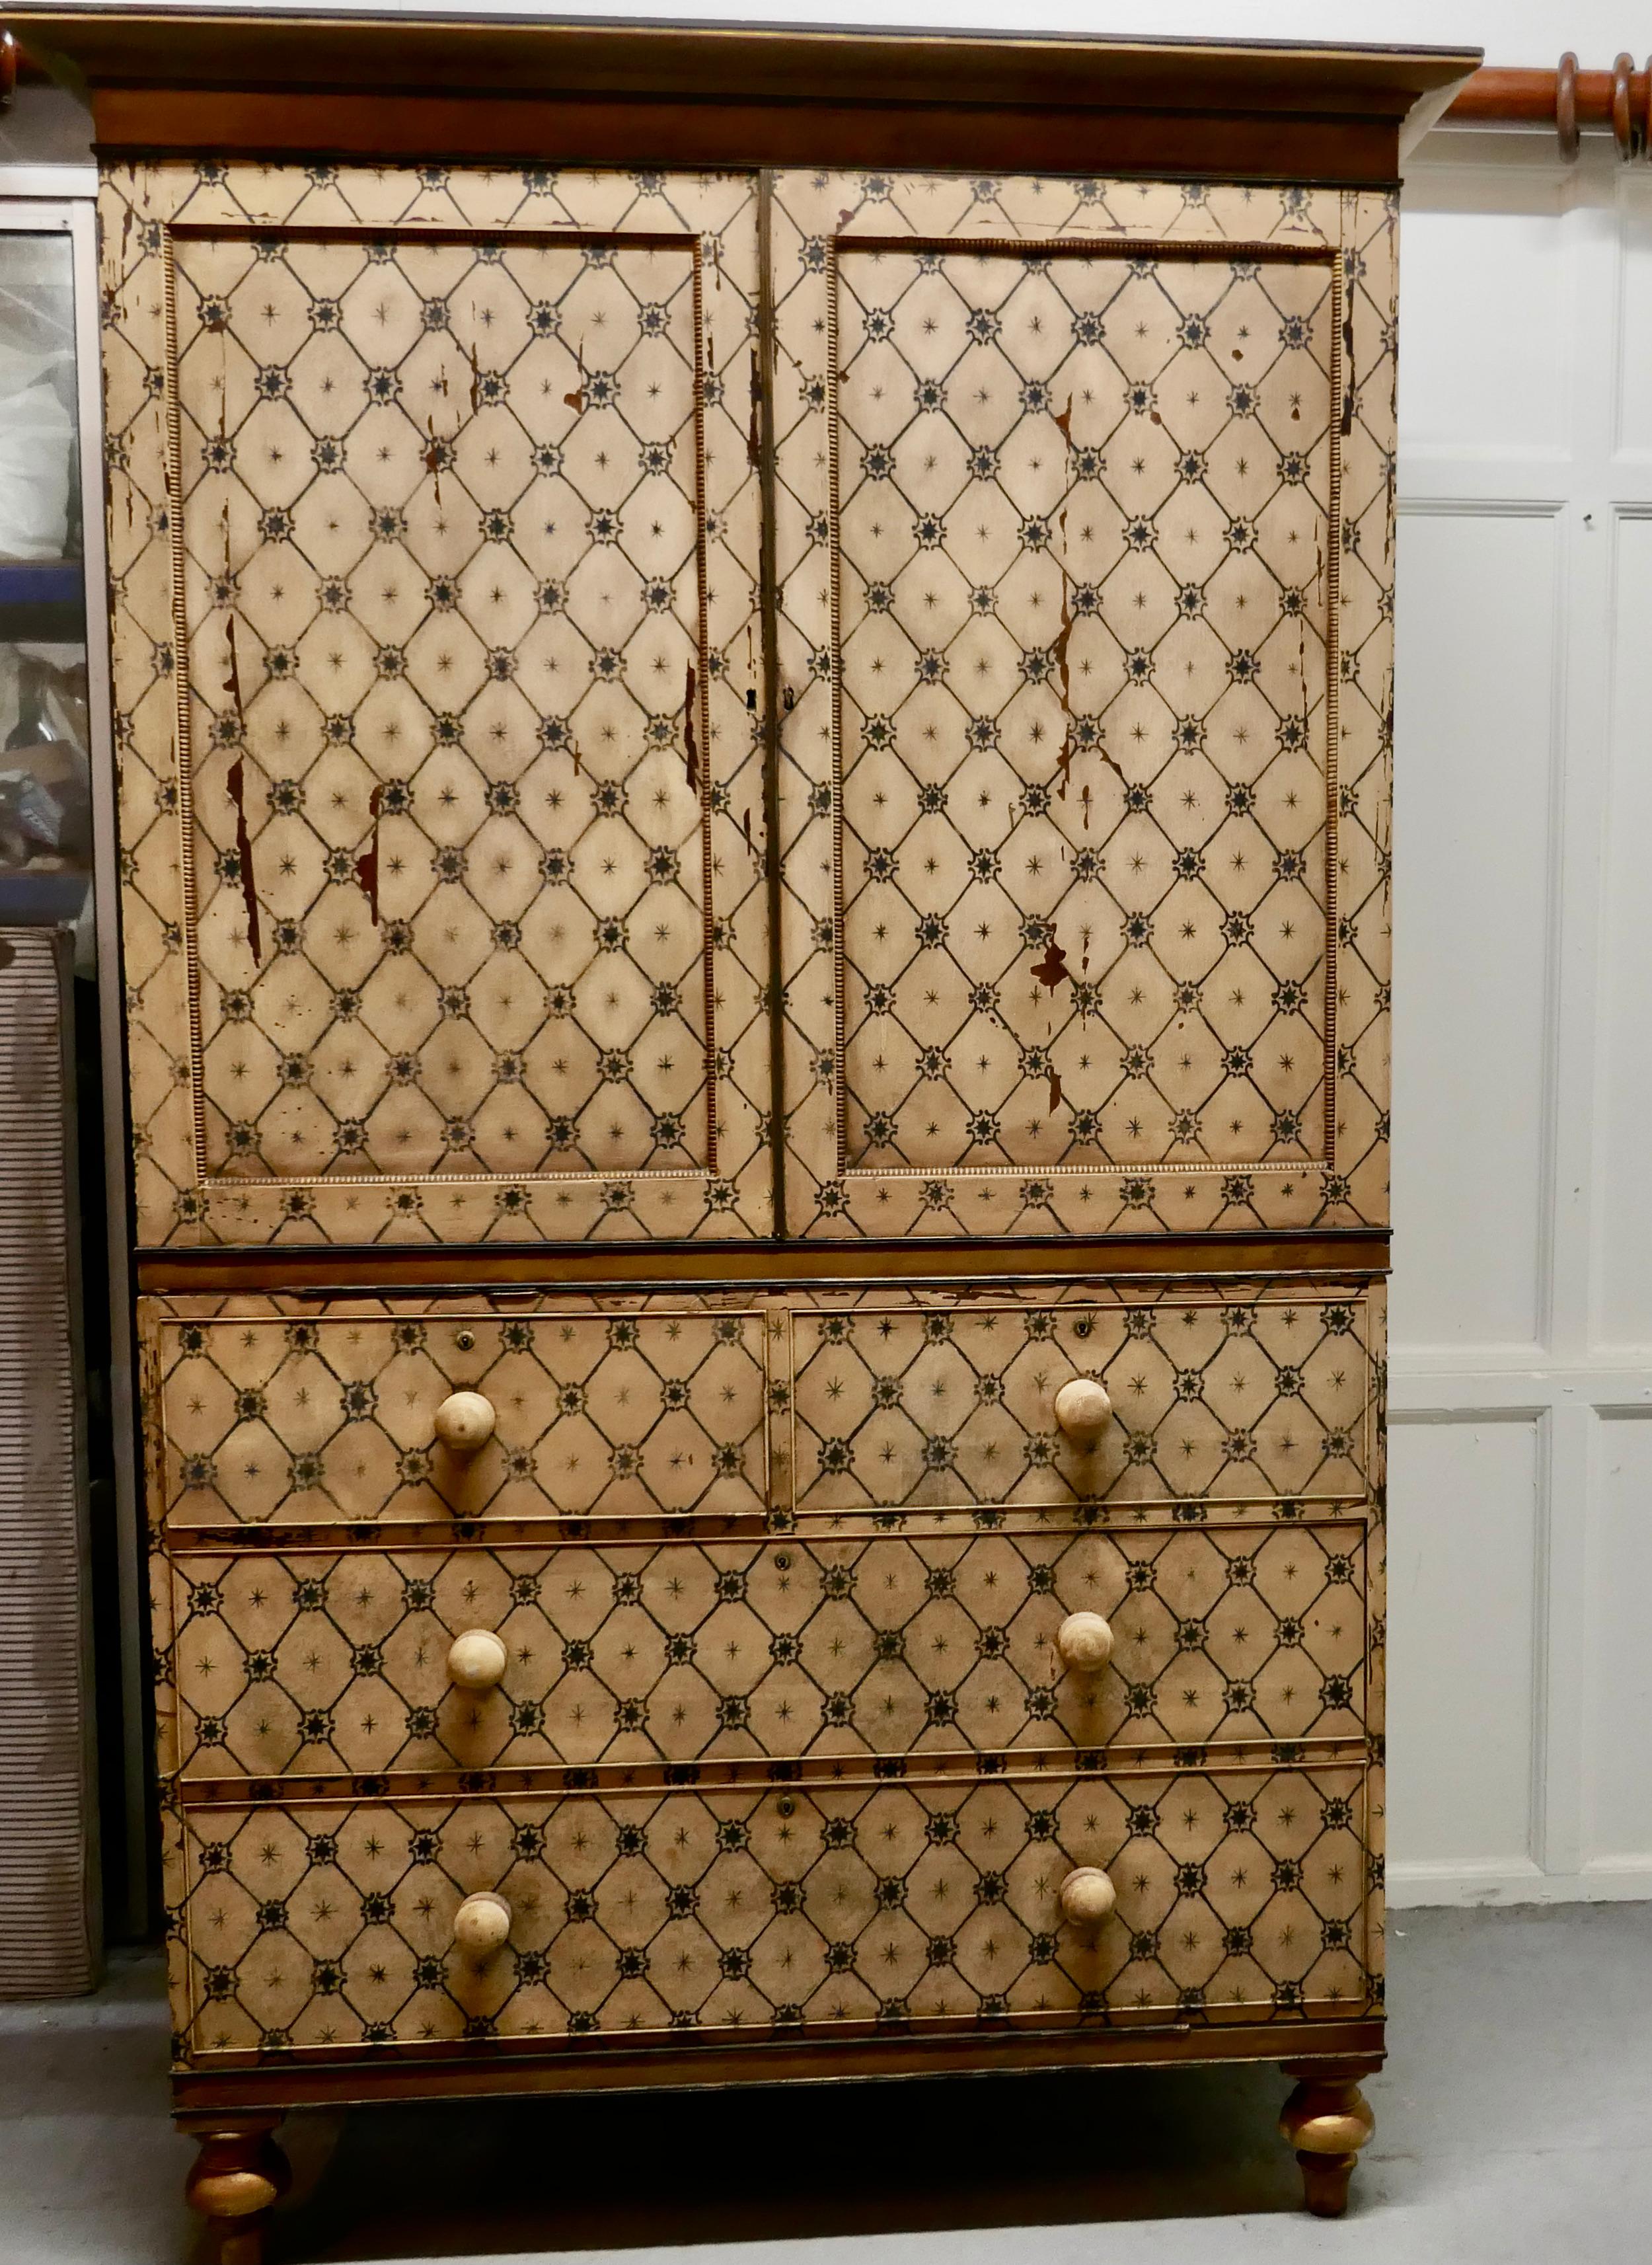 19th century Aesthetic Movement hand painted linen press

This is a fantastic looking piece furniture it dates from the mid-19th century
The press is painted in the Romantic style known as Aestheticism, art from this particular movement focused